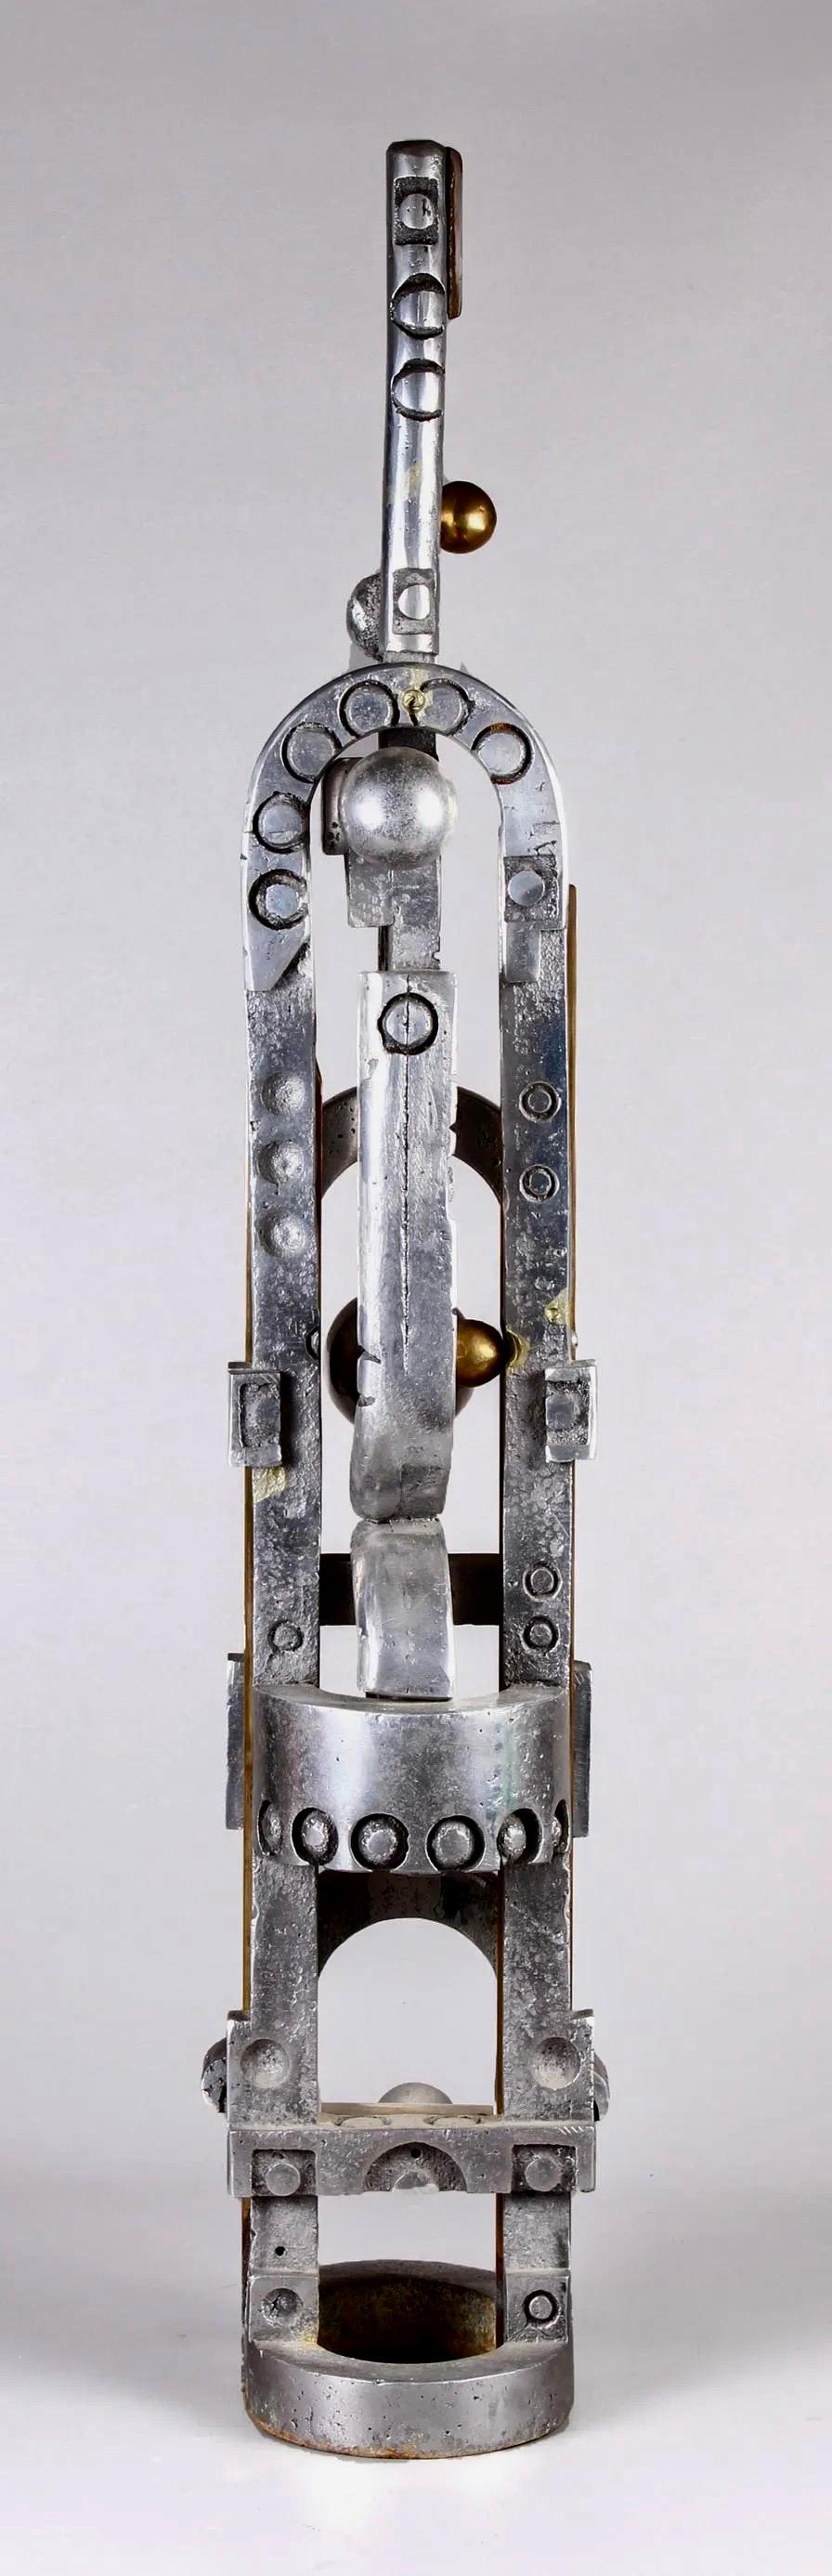 Brutalist Aluminum Brass Contemporary Totem Sculpture Abstract non objective - Black Abstract Sculpture by Unknown